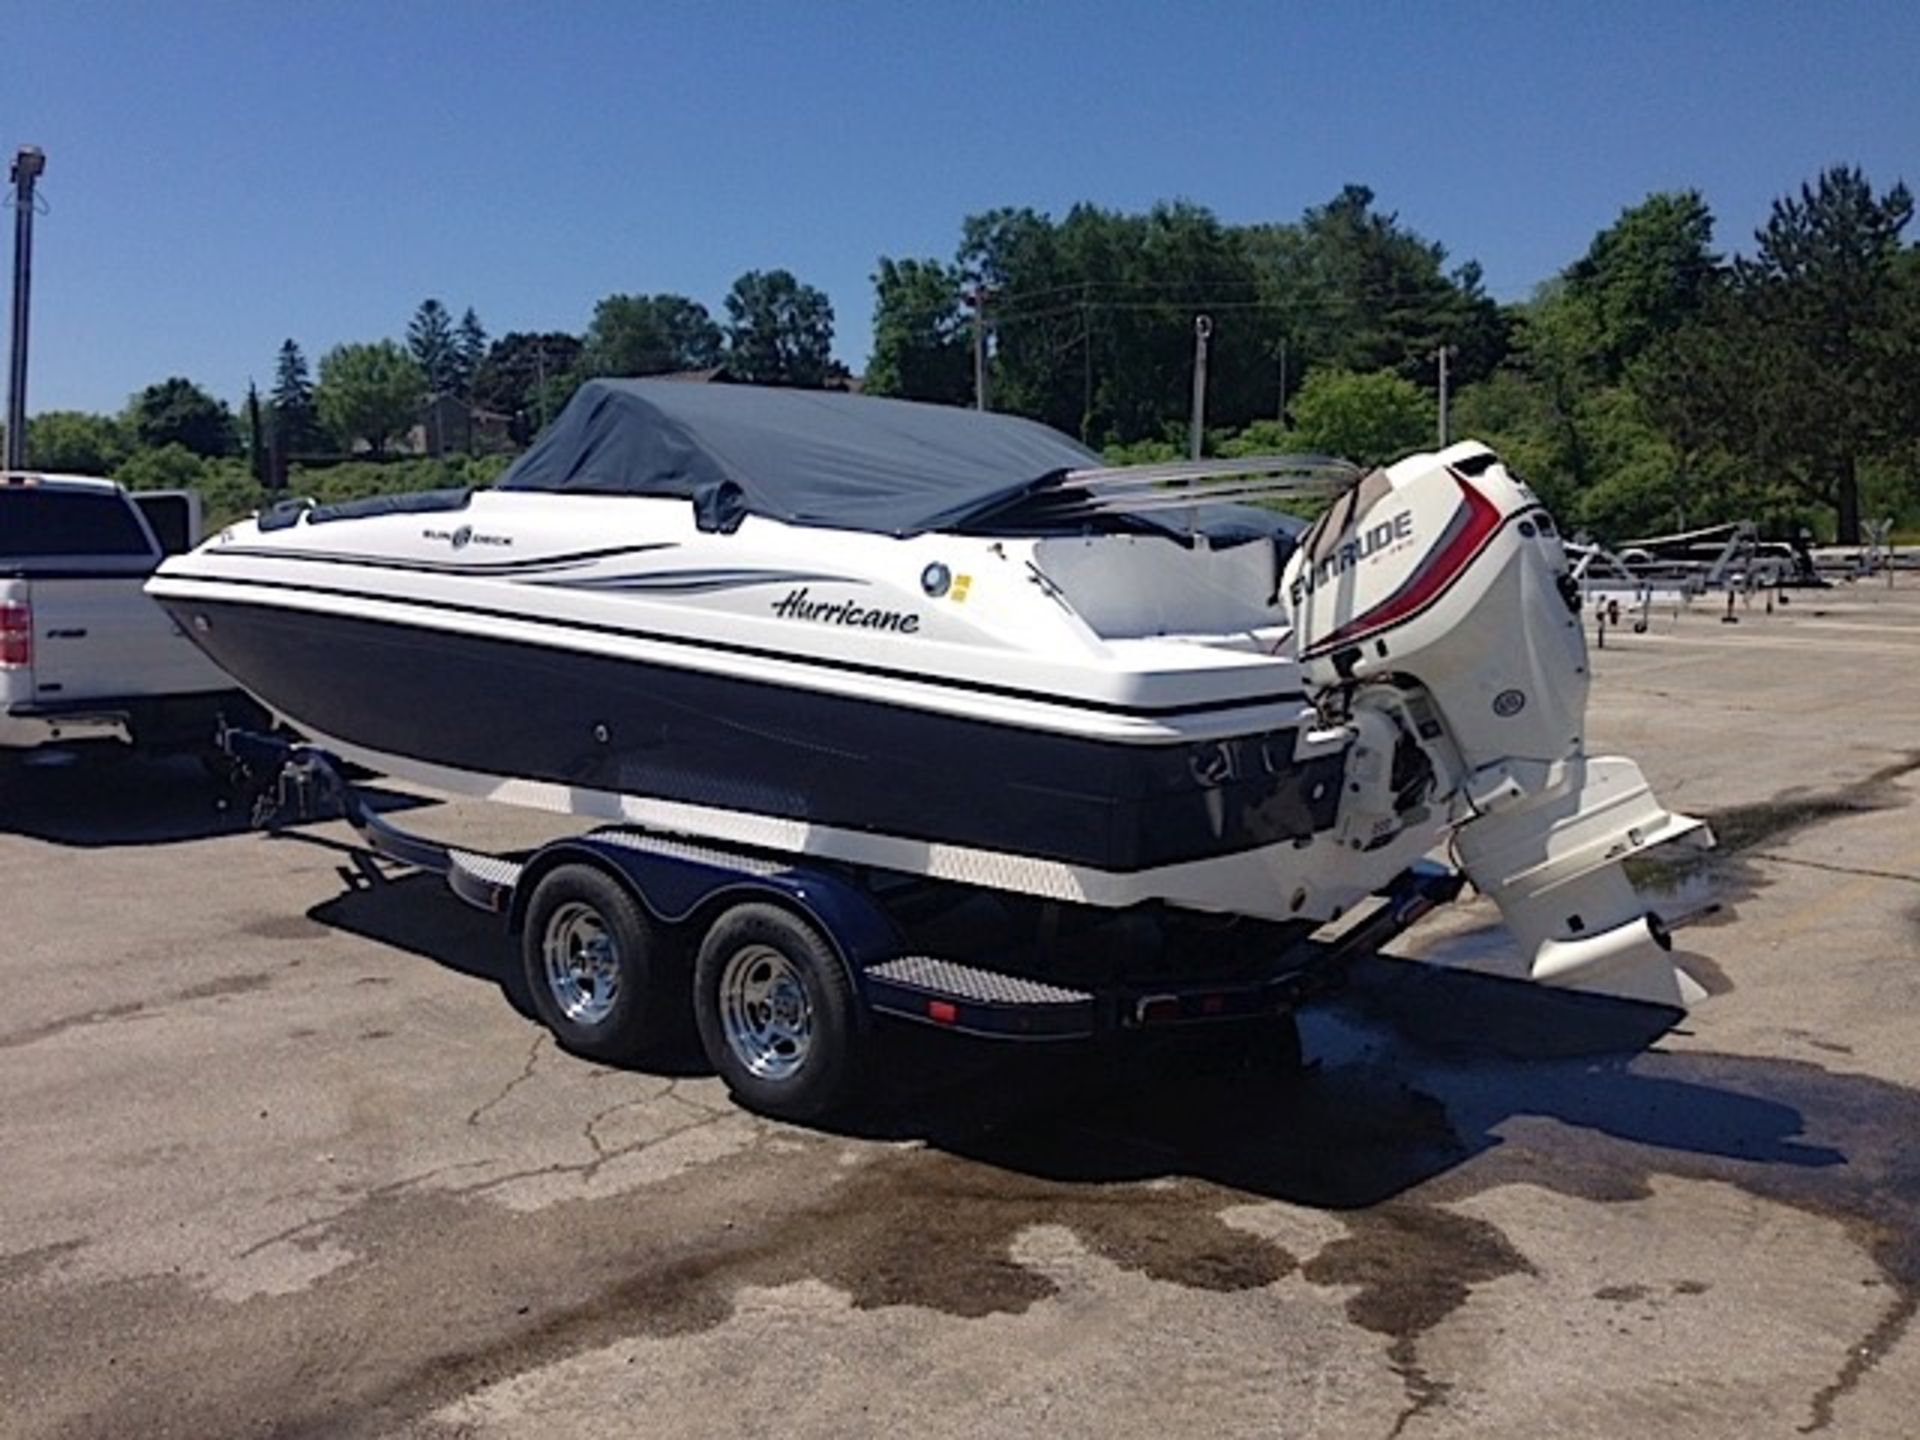 2014 HURRICAN SUNDECK (187) OUTBOARD BOAT WITH TRAILER - NEVER SEEN WATER  (NOT INCLUDING MOTOR)